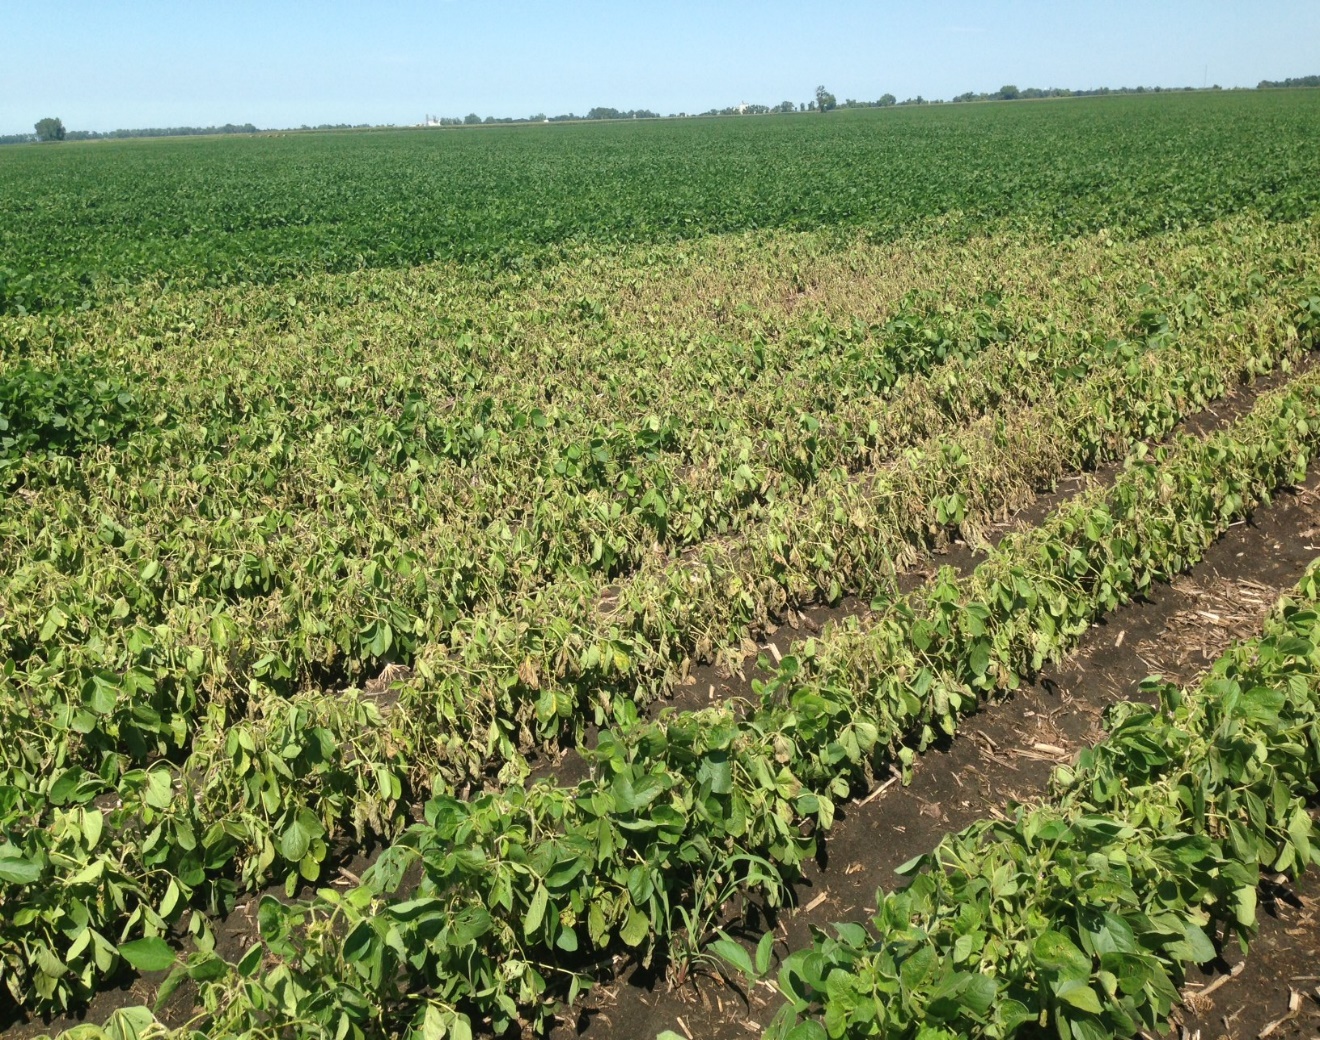 A soybean field with notisable yellowing and browning on a section of plants.